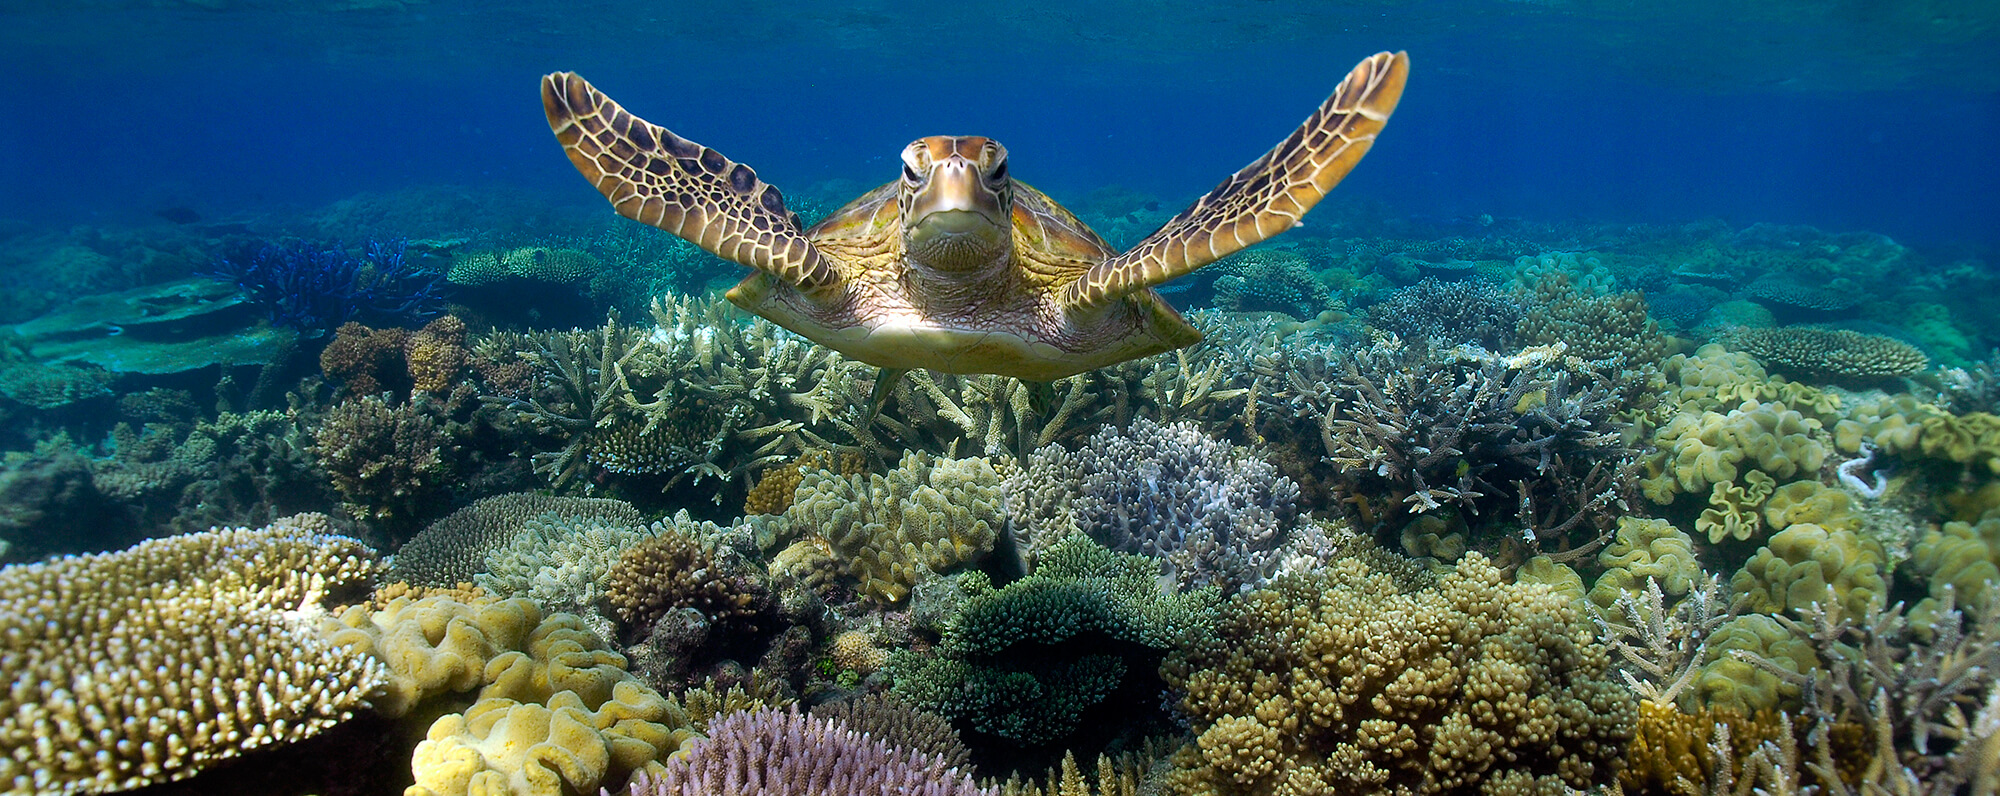 How to save the Great Barrier Reef?